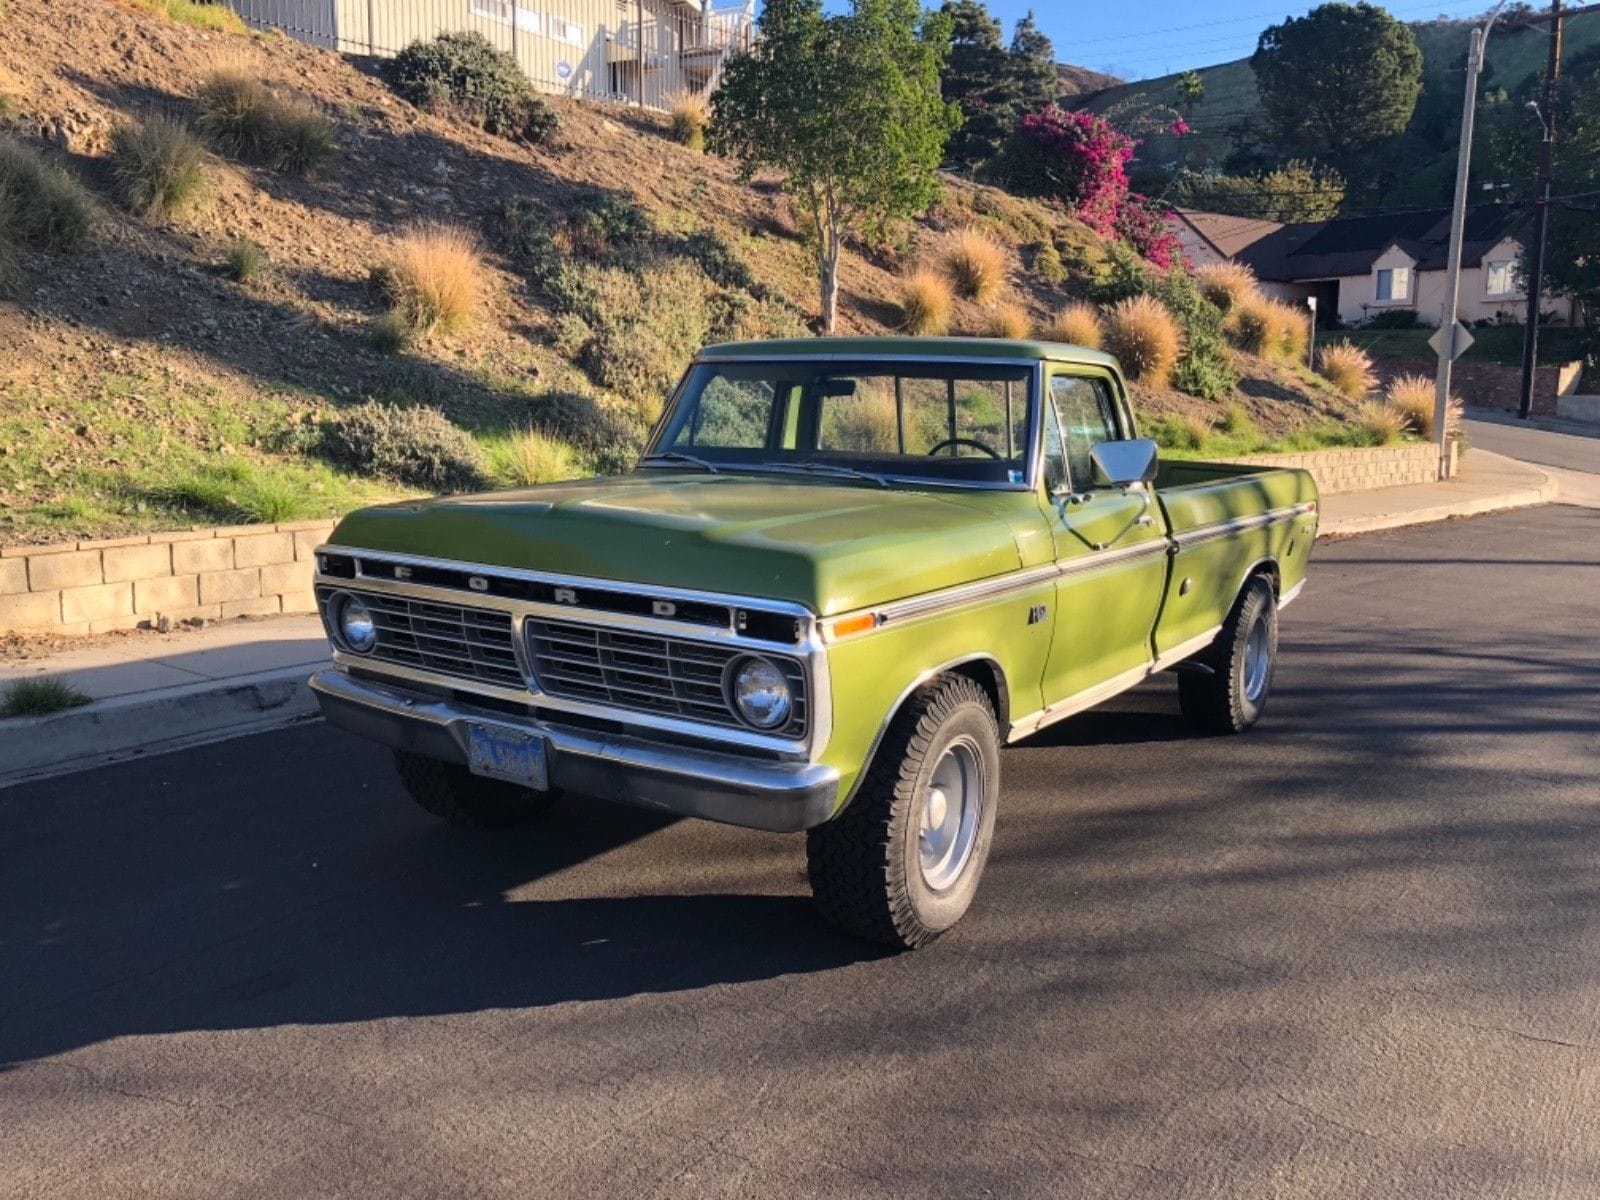 what should i sell my 1973 F-250 ranger XLT for? - Ford Forum